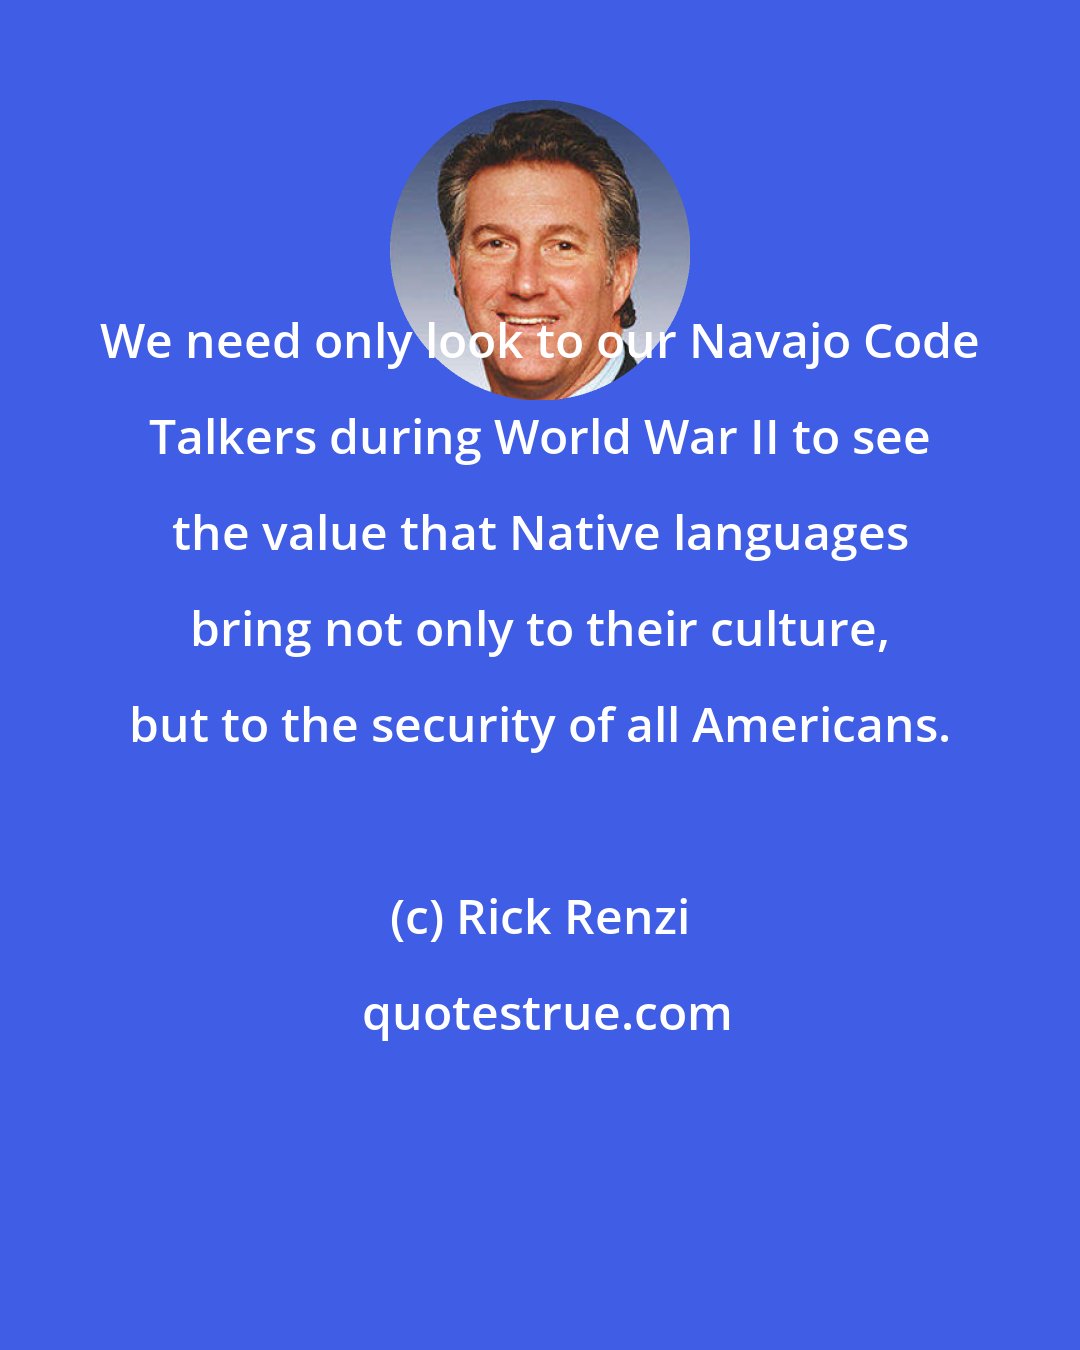 Rick Renzi: We need only look to our Navajo Code Talkers during World War II to see the value that Native languages bring not only to their culture, but to the security of all Americans.